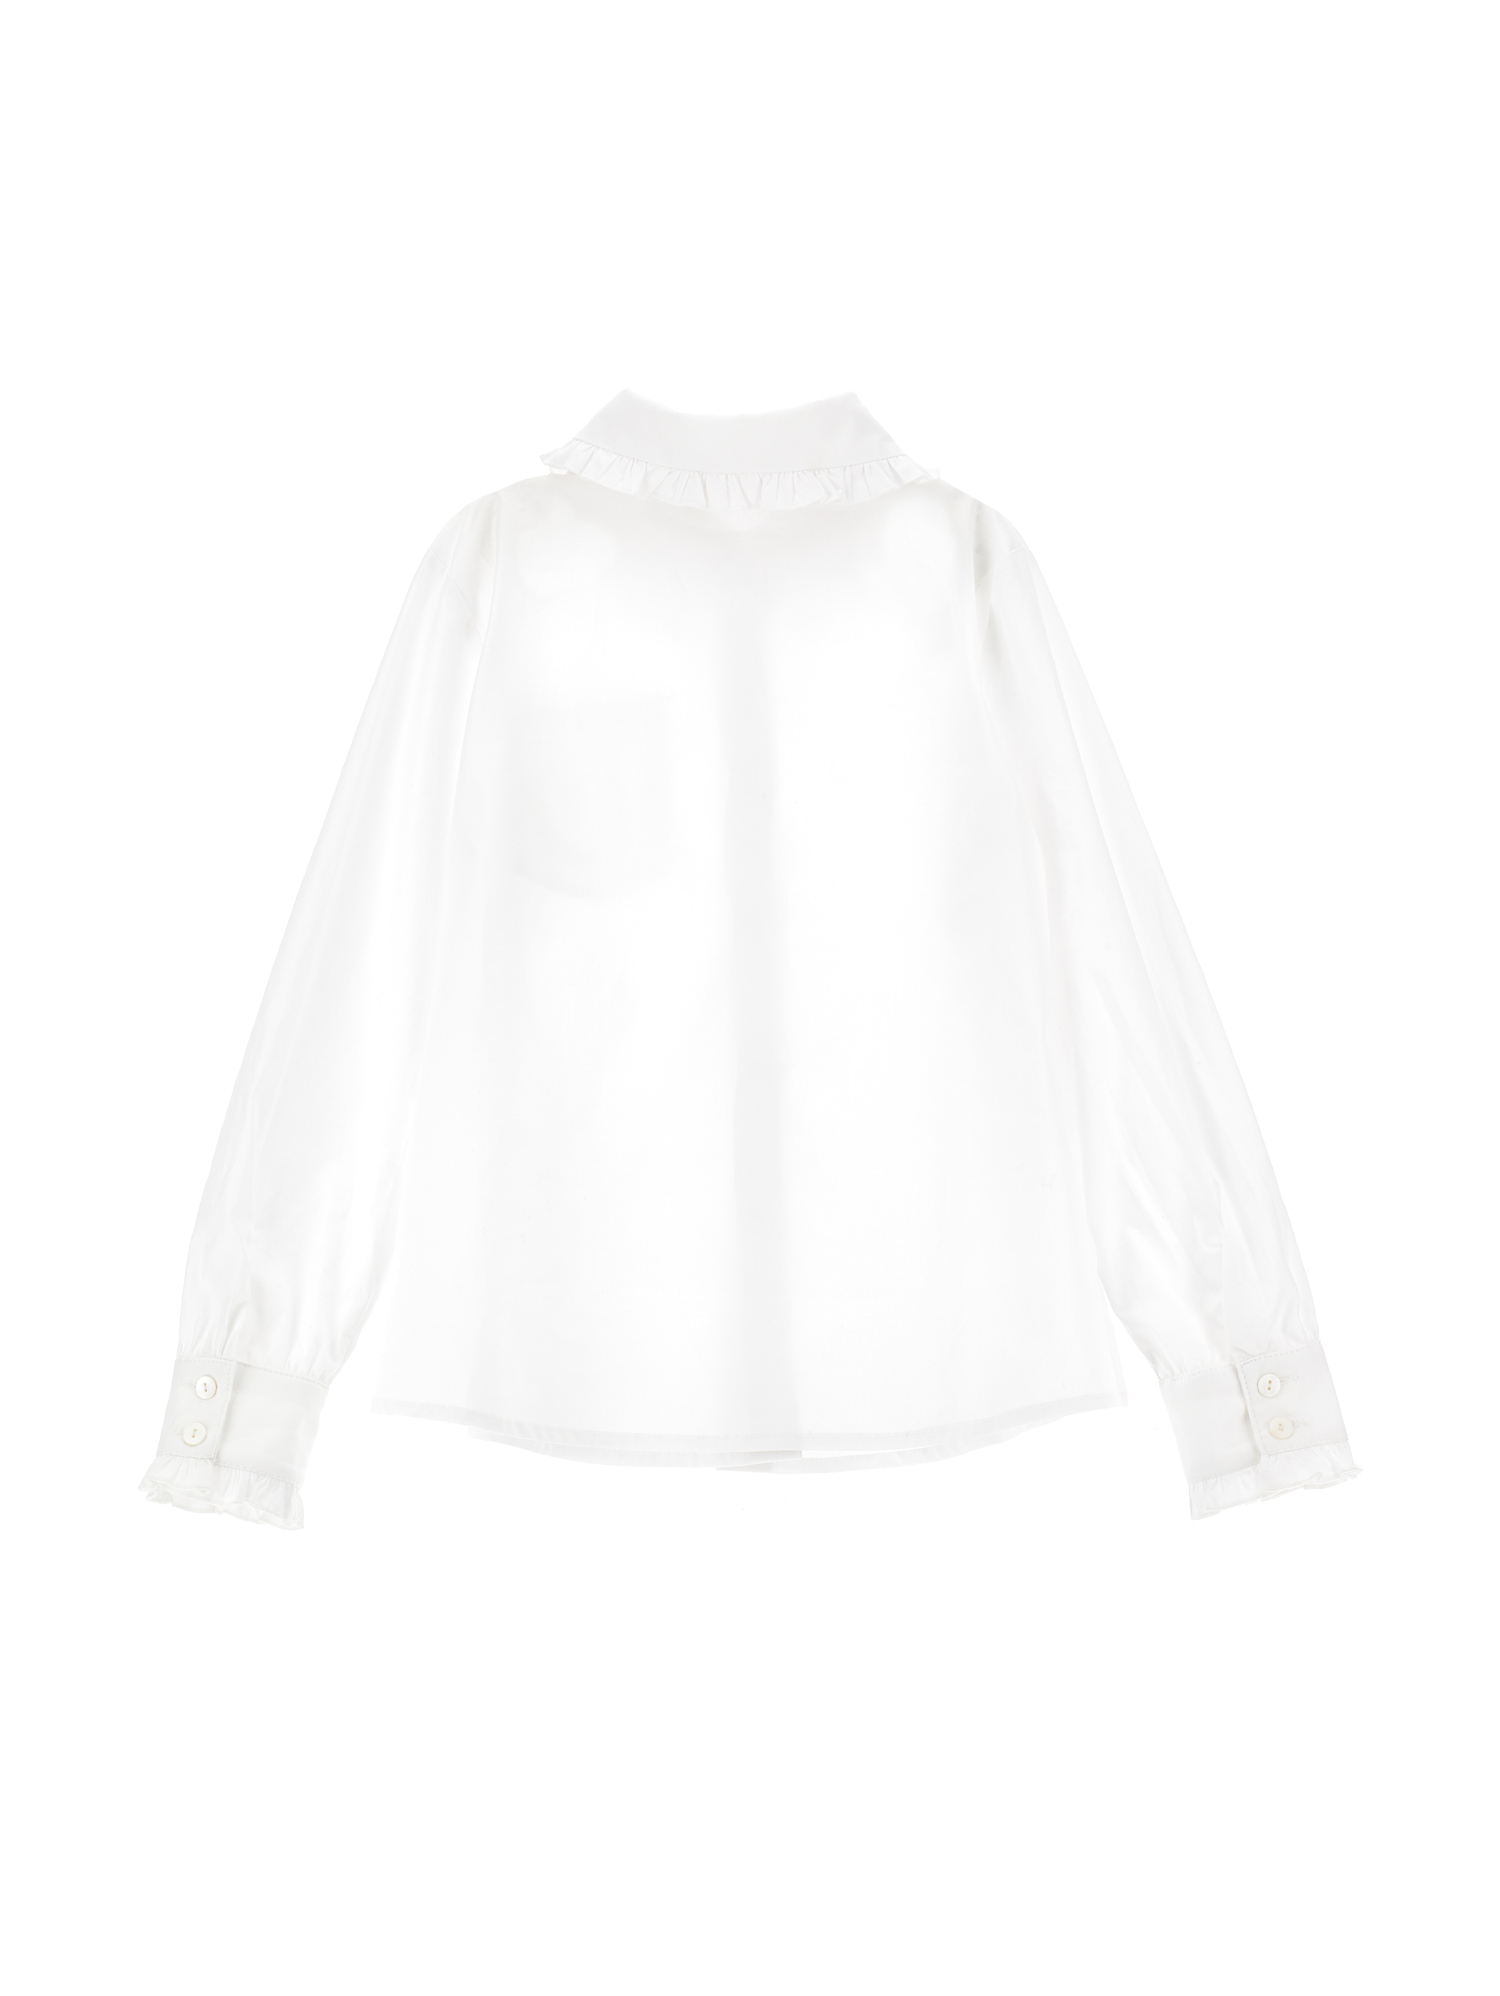 Shop Monnalisa Stretch Shirt With Bow In White + Blue